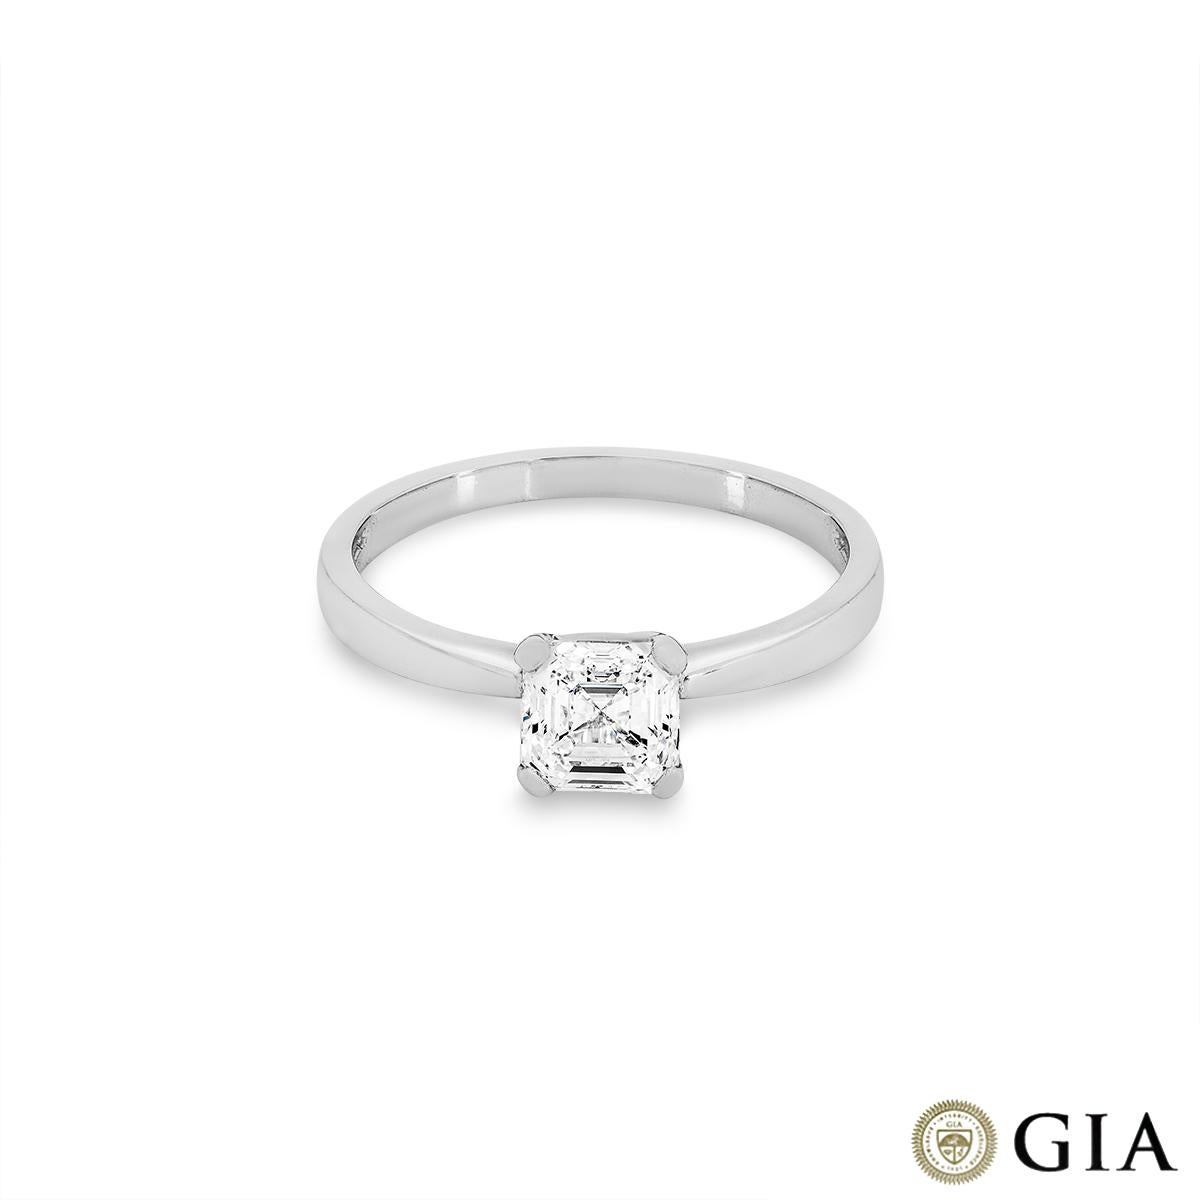 GIA Certified Platinum Asscher Cut Diamond Ring 0.97ct F/VVS2 In Excellent Condition For Sale In London, GB